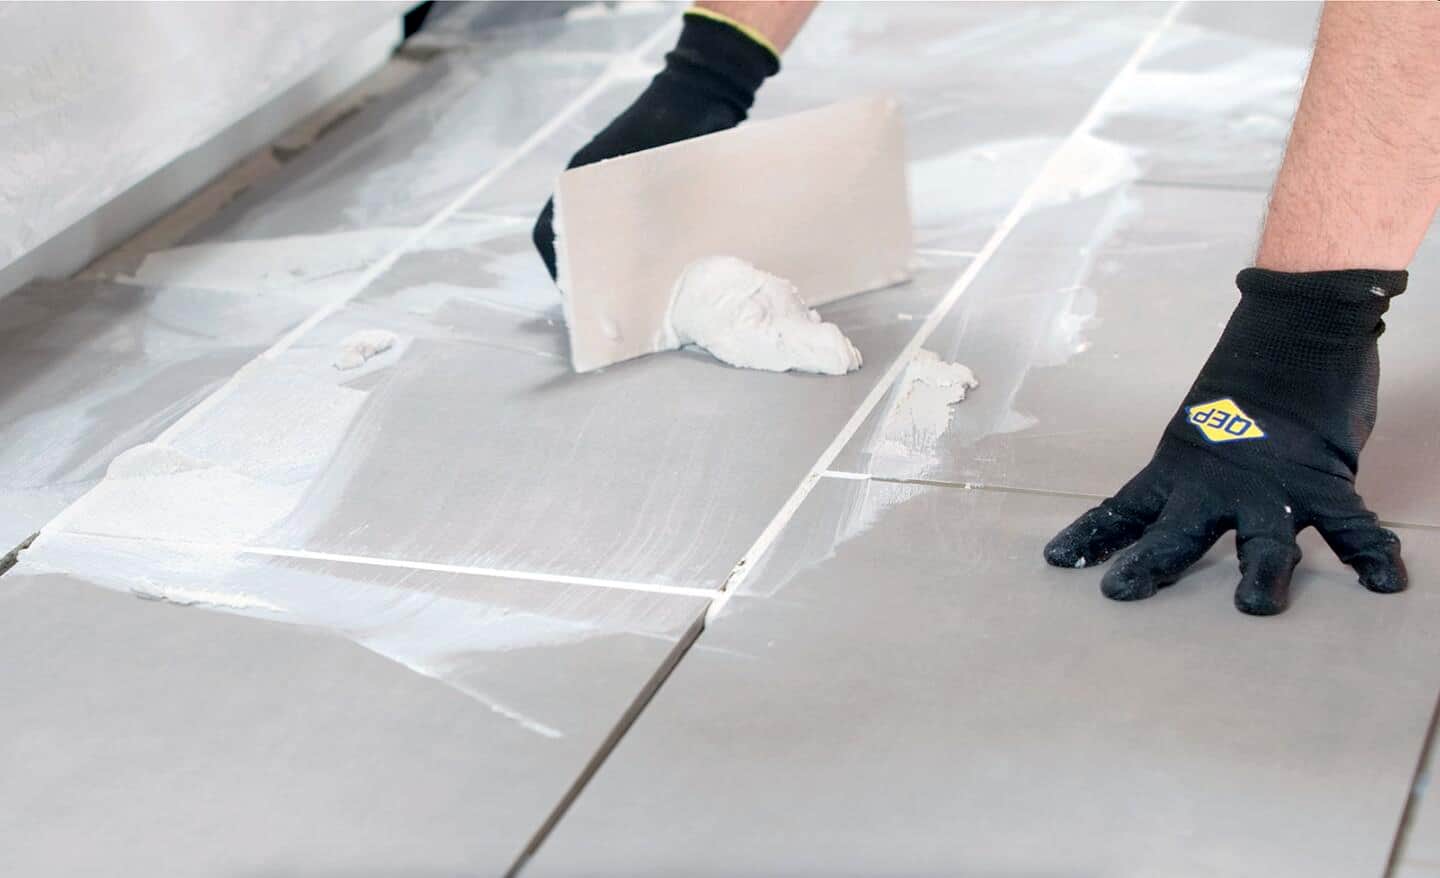 A person applying grout to floor tile.